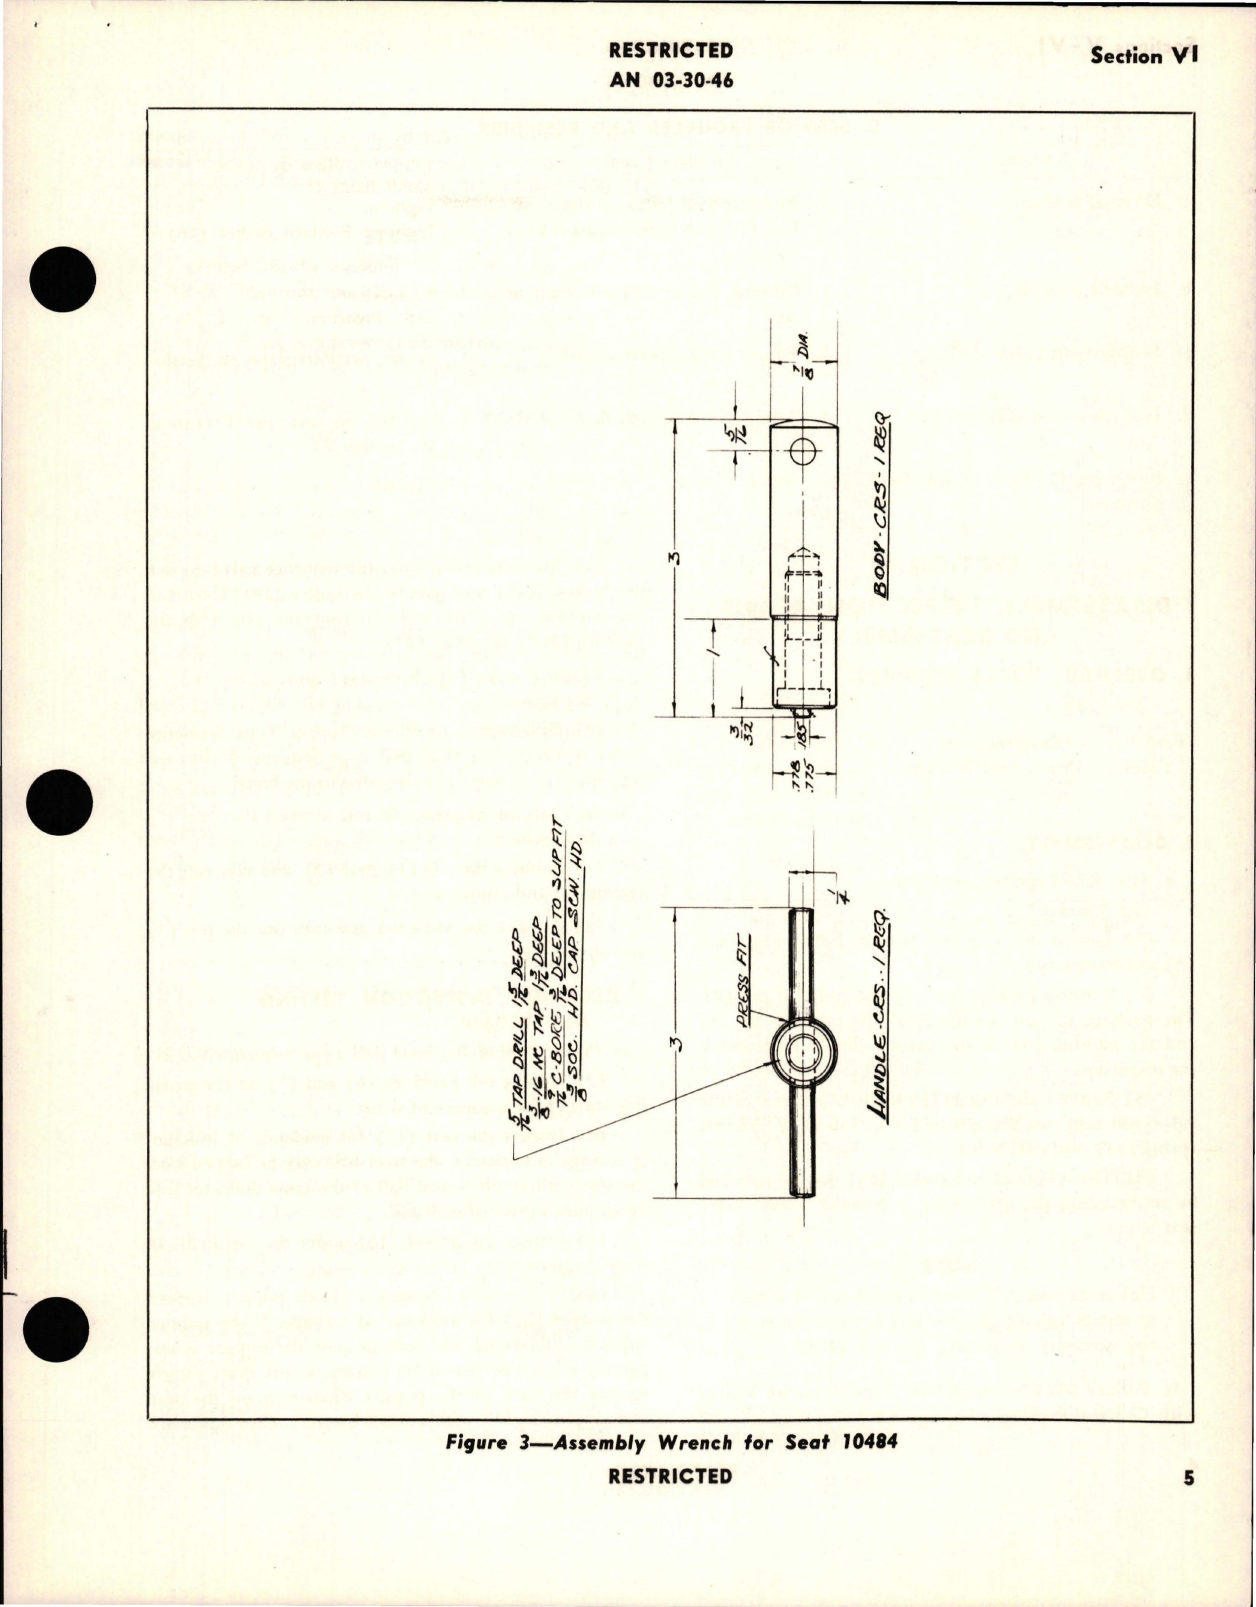 Sample page 9 from AirCorps Library document: Instructions with Parts Catalog for Hydraulic Sequence Valves